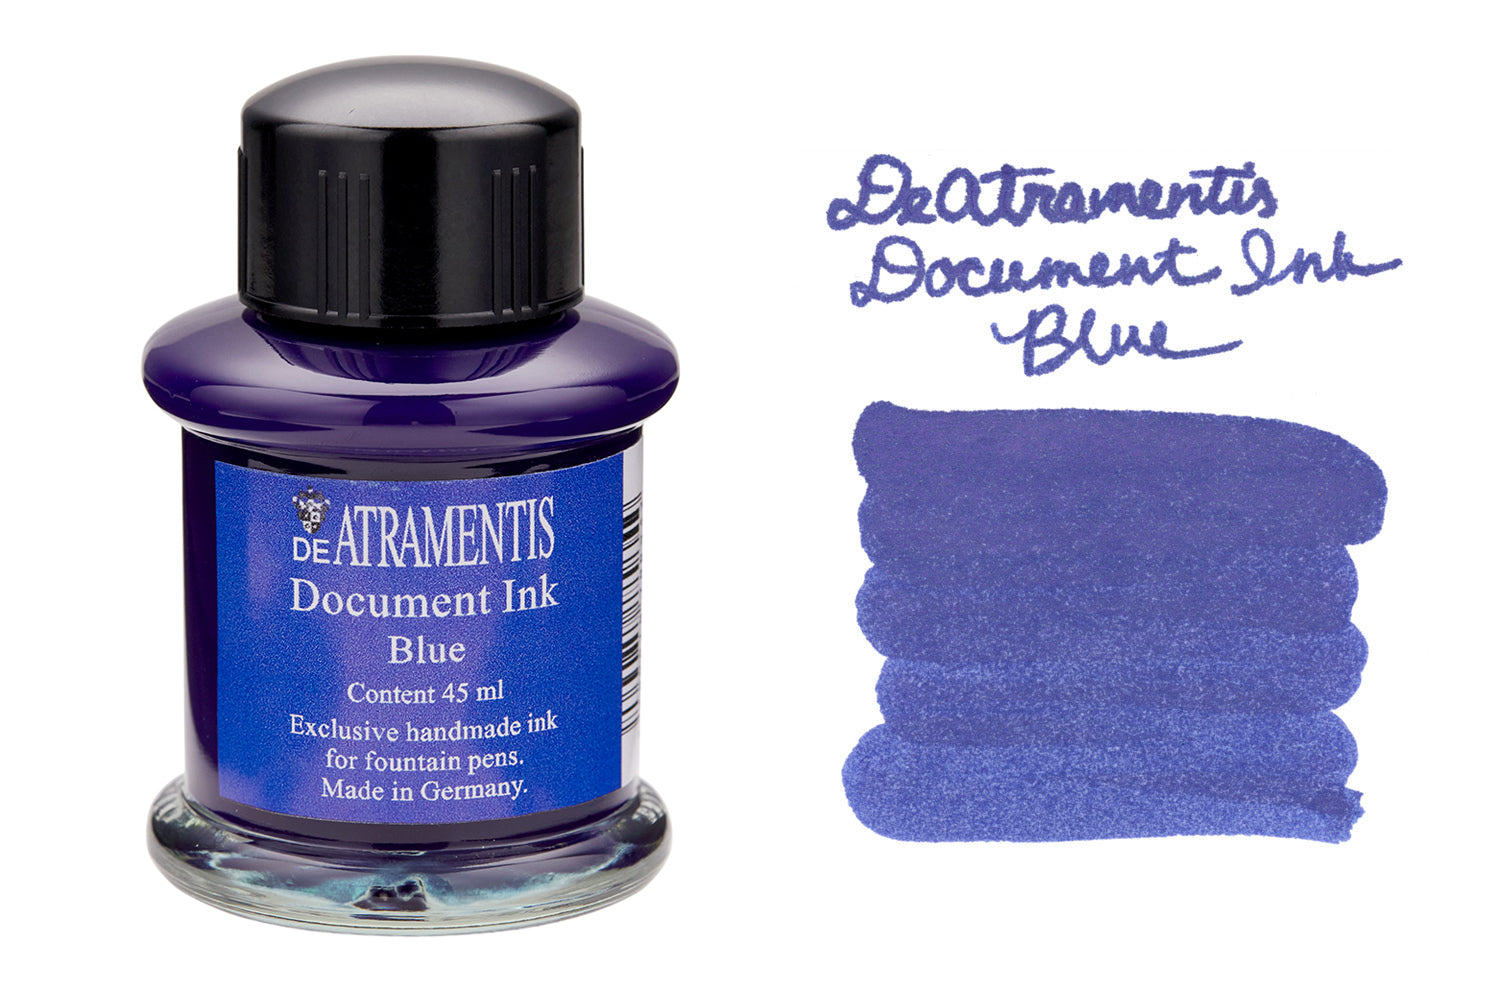 Ink Review: Waterproof, Permanent Inks - The Well-Appointed Desk